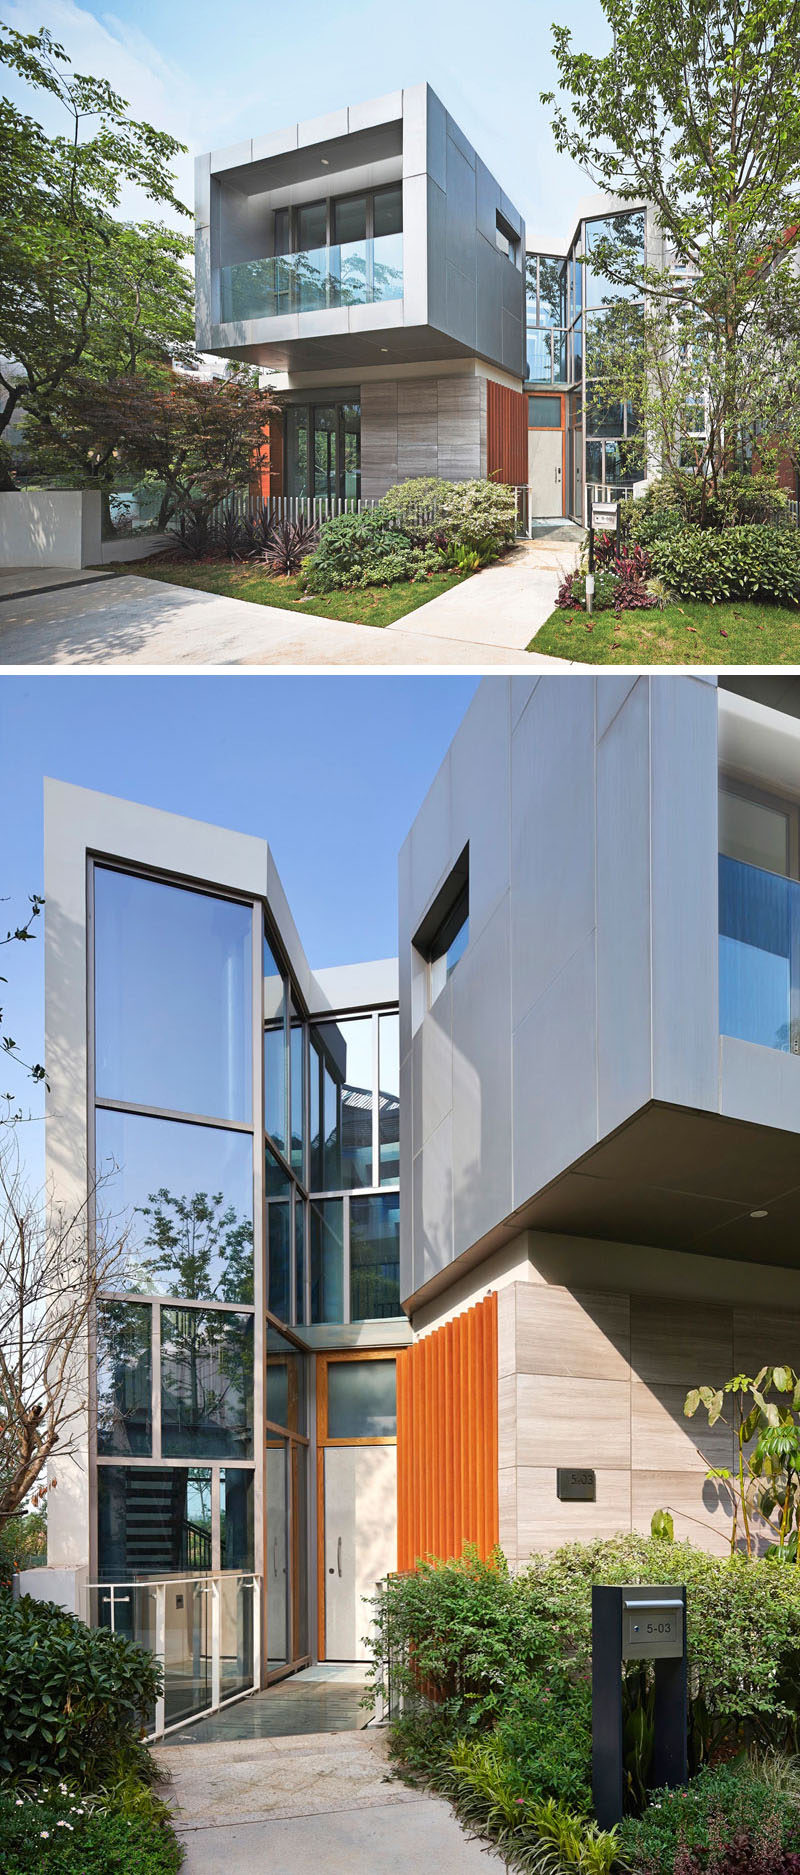 20 Exterior Pictures Of A Modern House Development In China By John Friedman Alice Kimm Architects